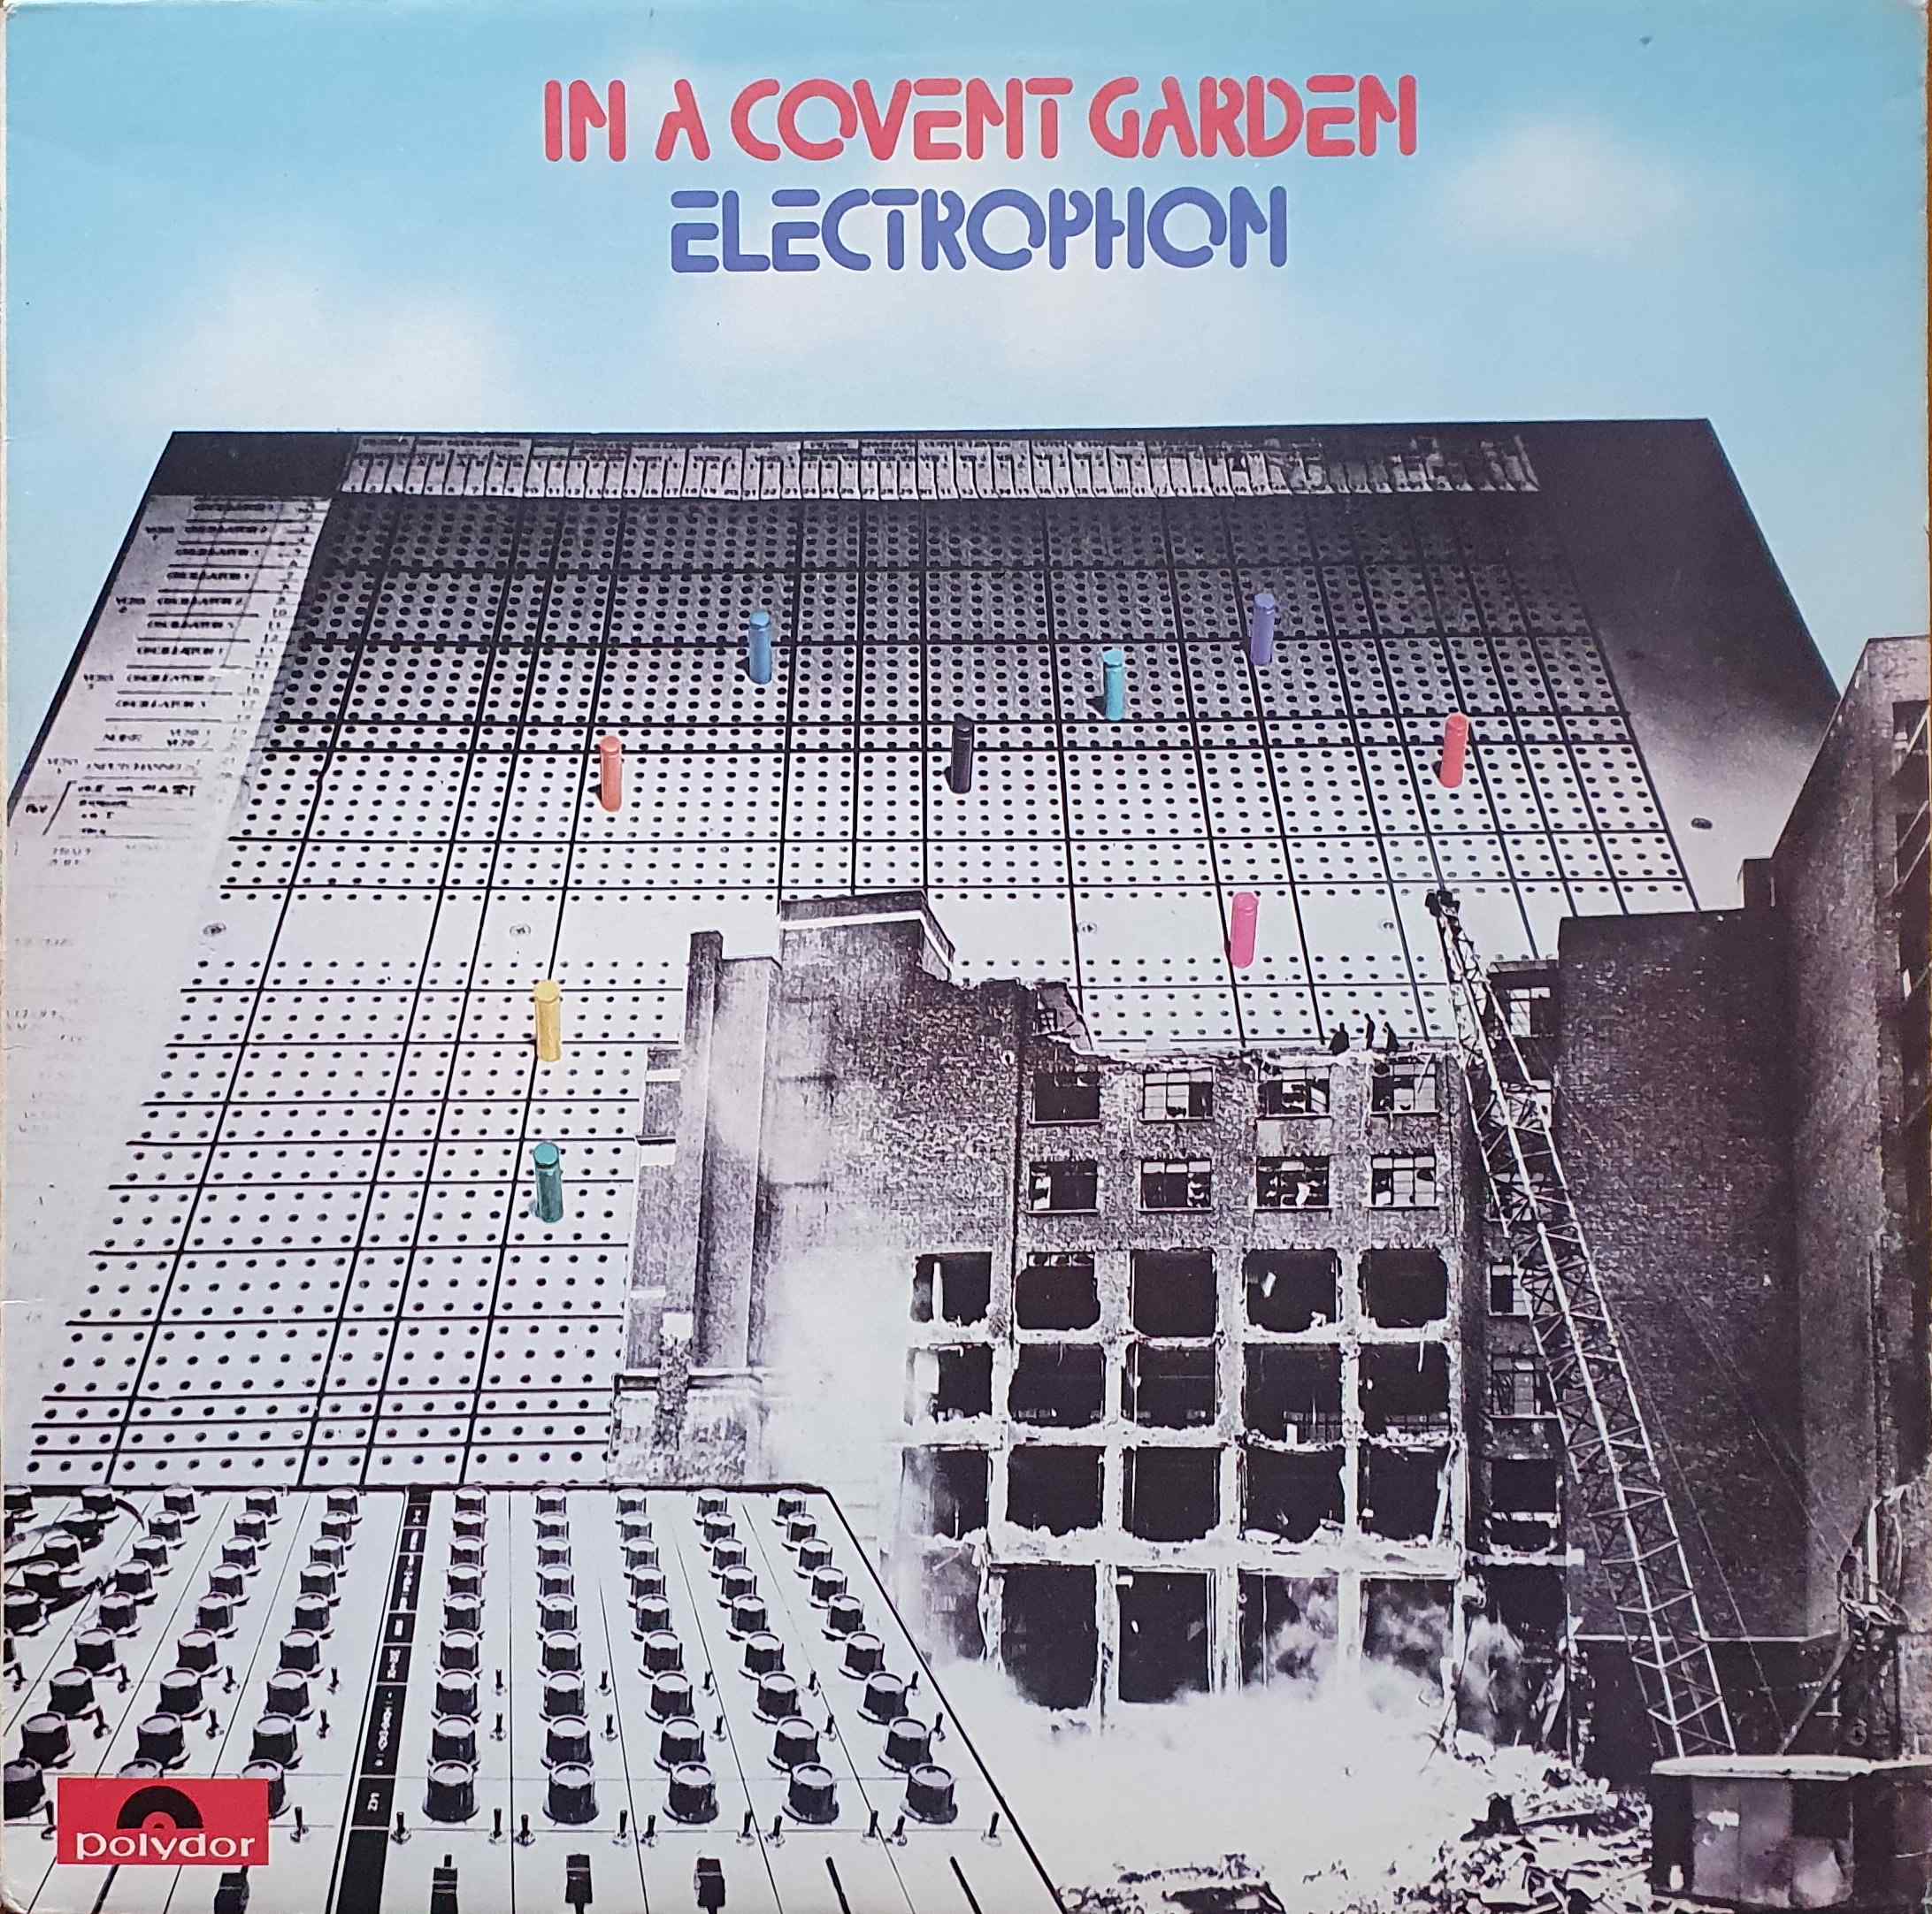 Picture of 2383 - 210 In a Covent Garden by artist Arr. Hodgson / Simpson from the BBC albums - Records and Tapes library